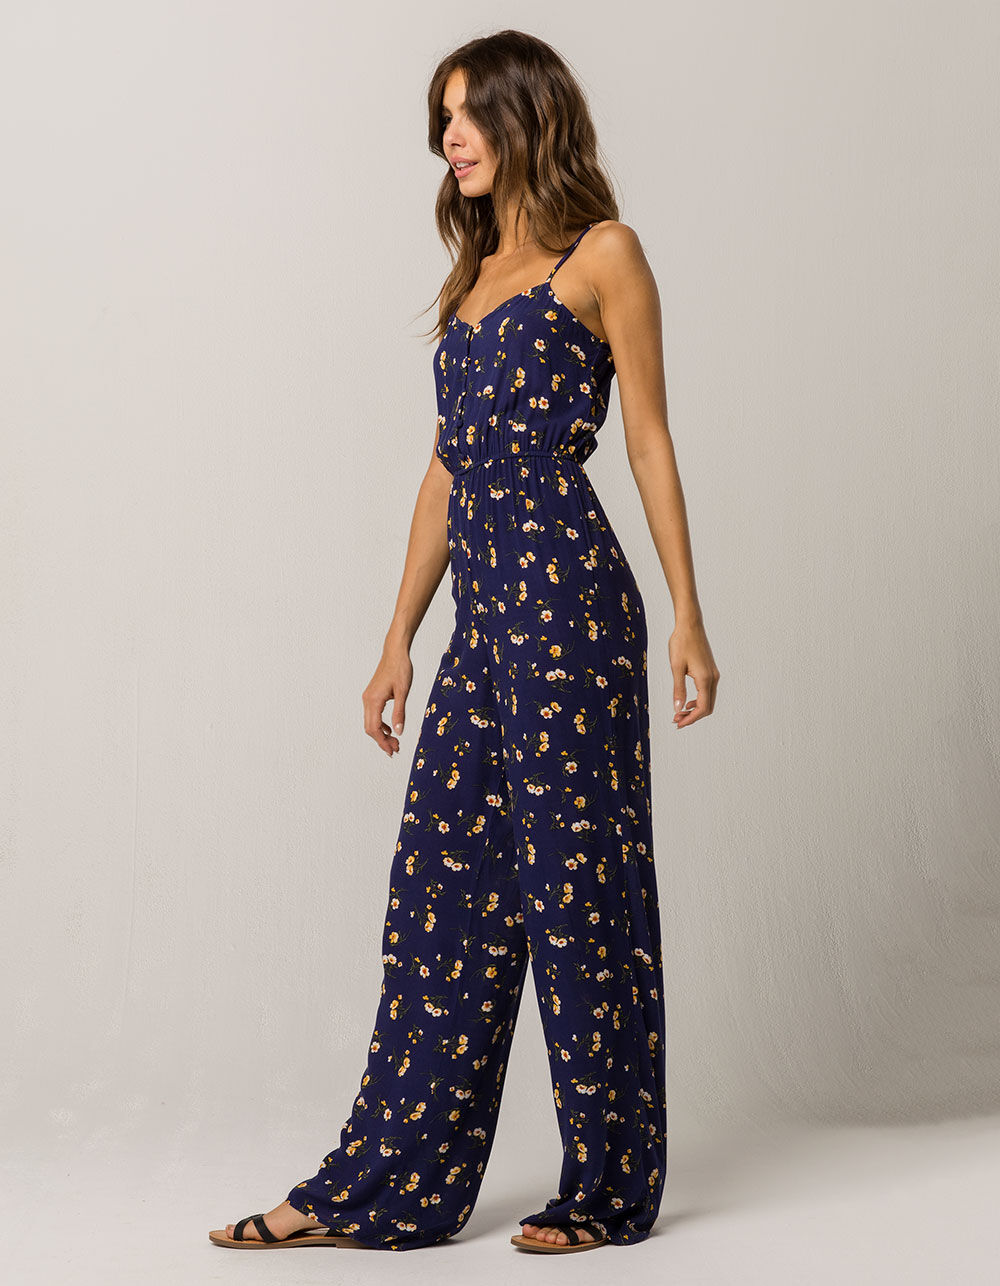 SKY AND SPARROW Floral Button Front Womens Jumpsuit - NAVY COMBO | Tillys